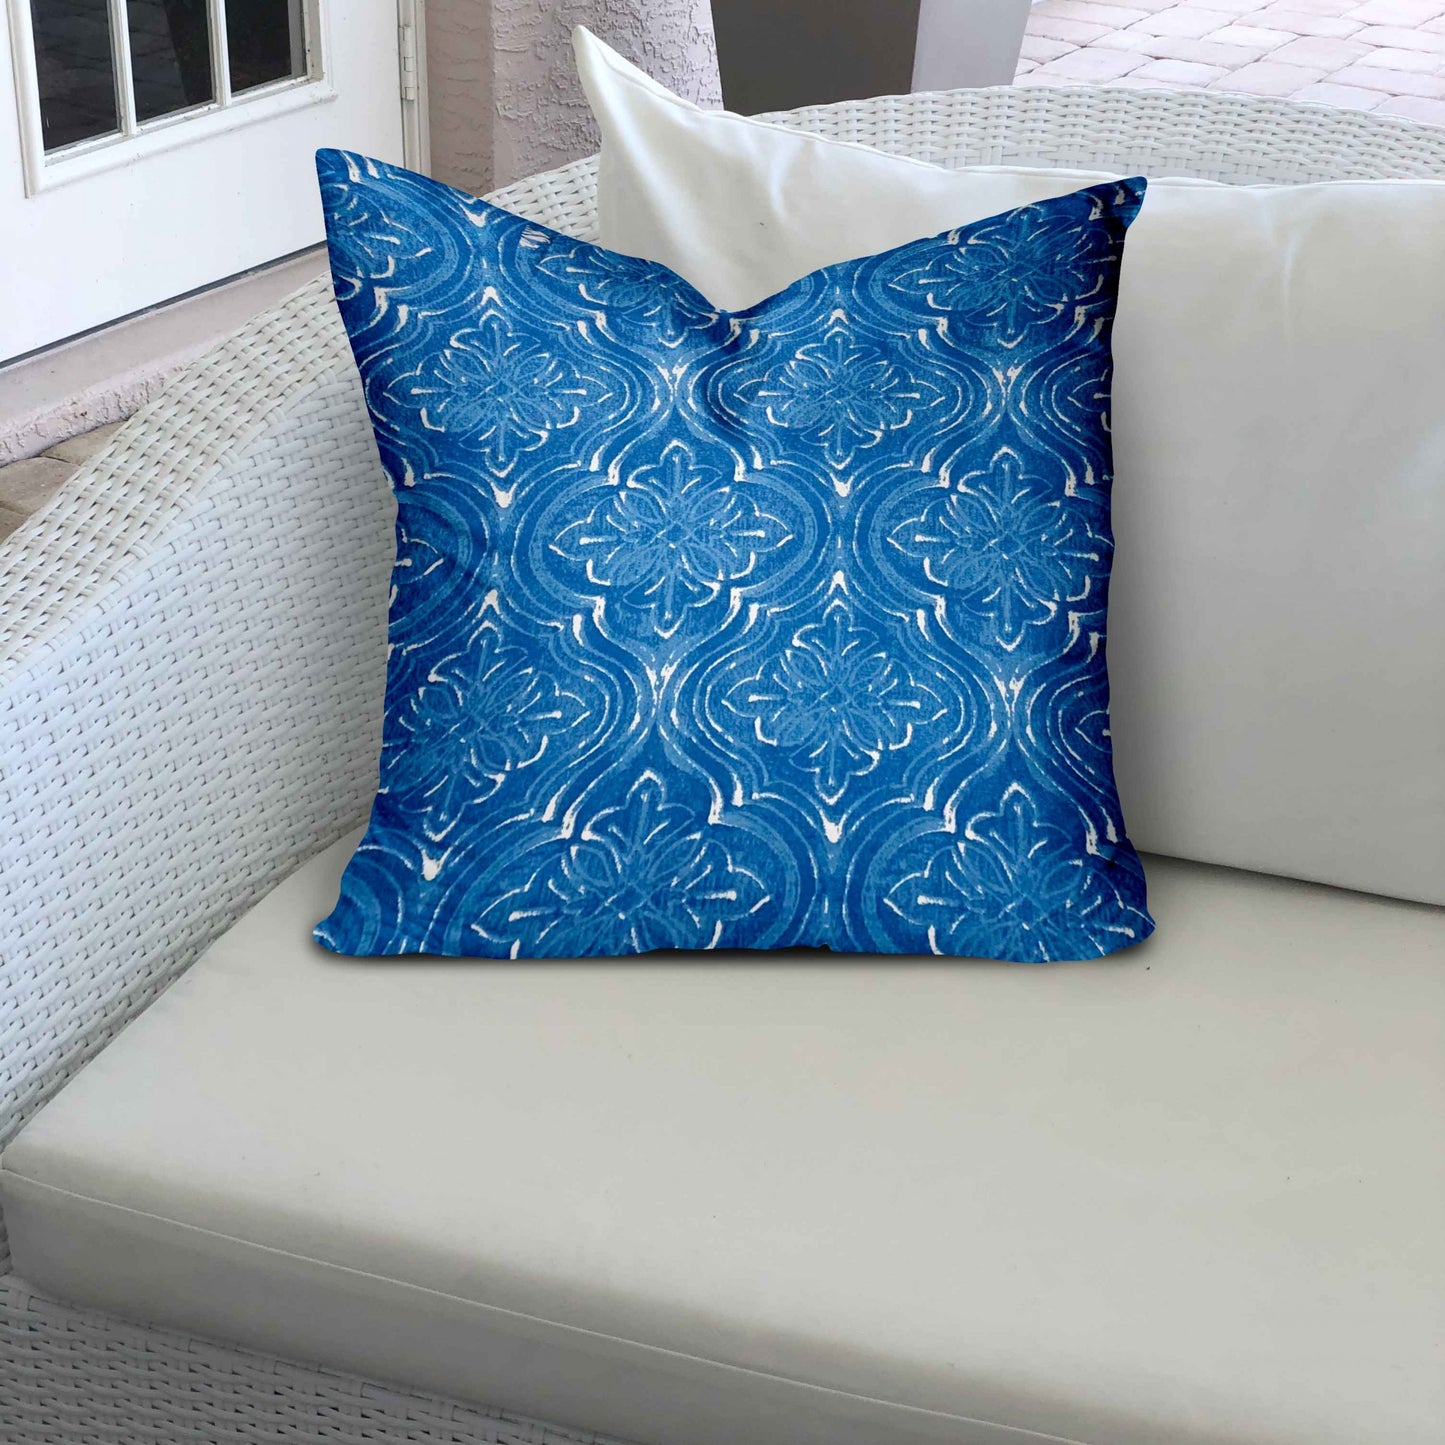 22" X 22" Blue And White Zippered Ikat Throw Indoor Outdoor Pillow Cover